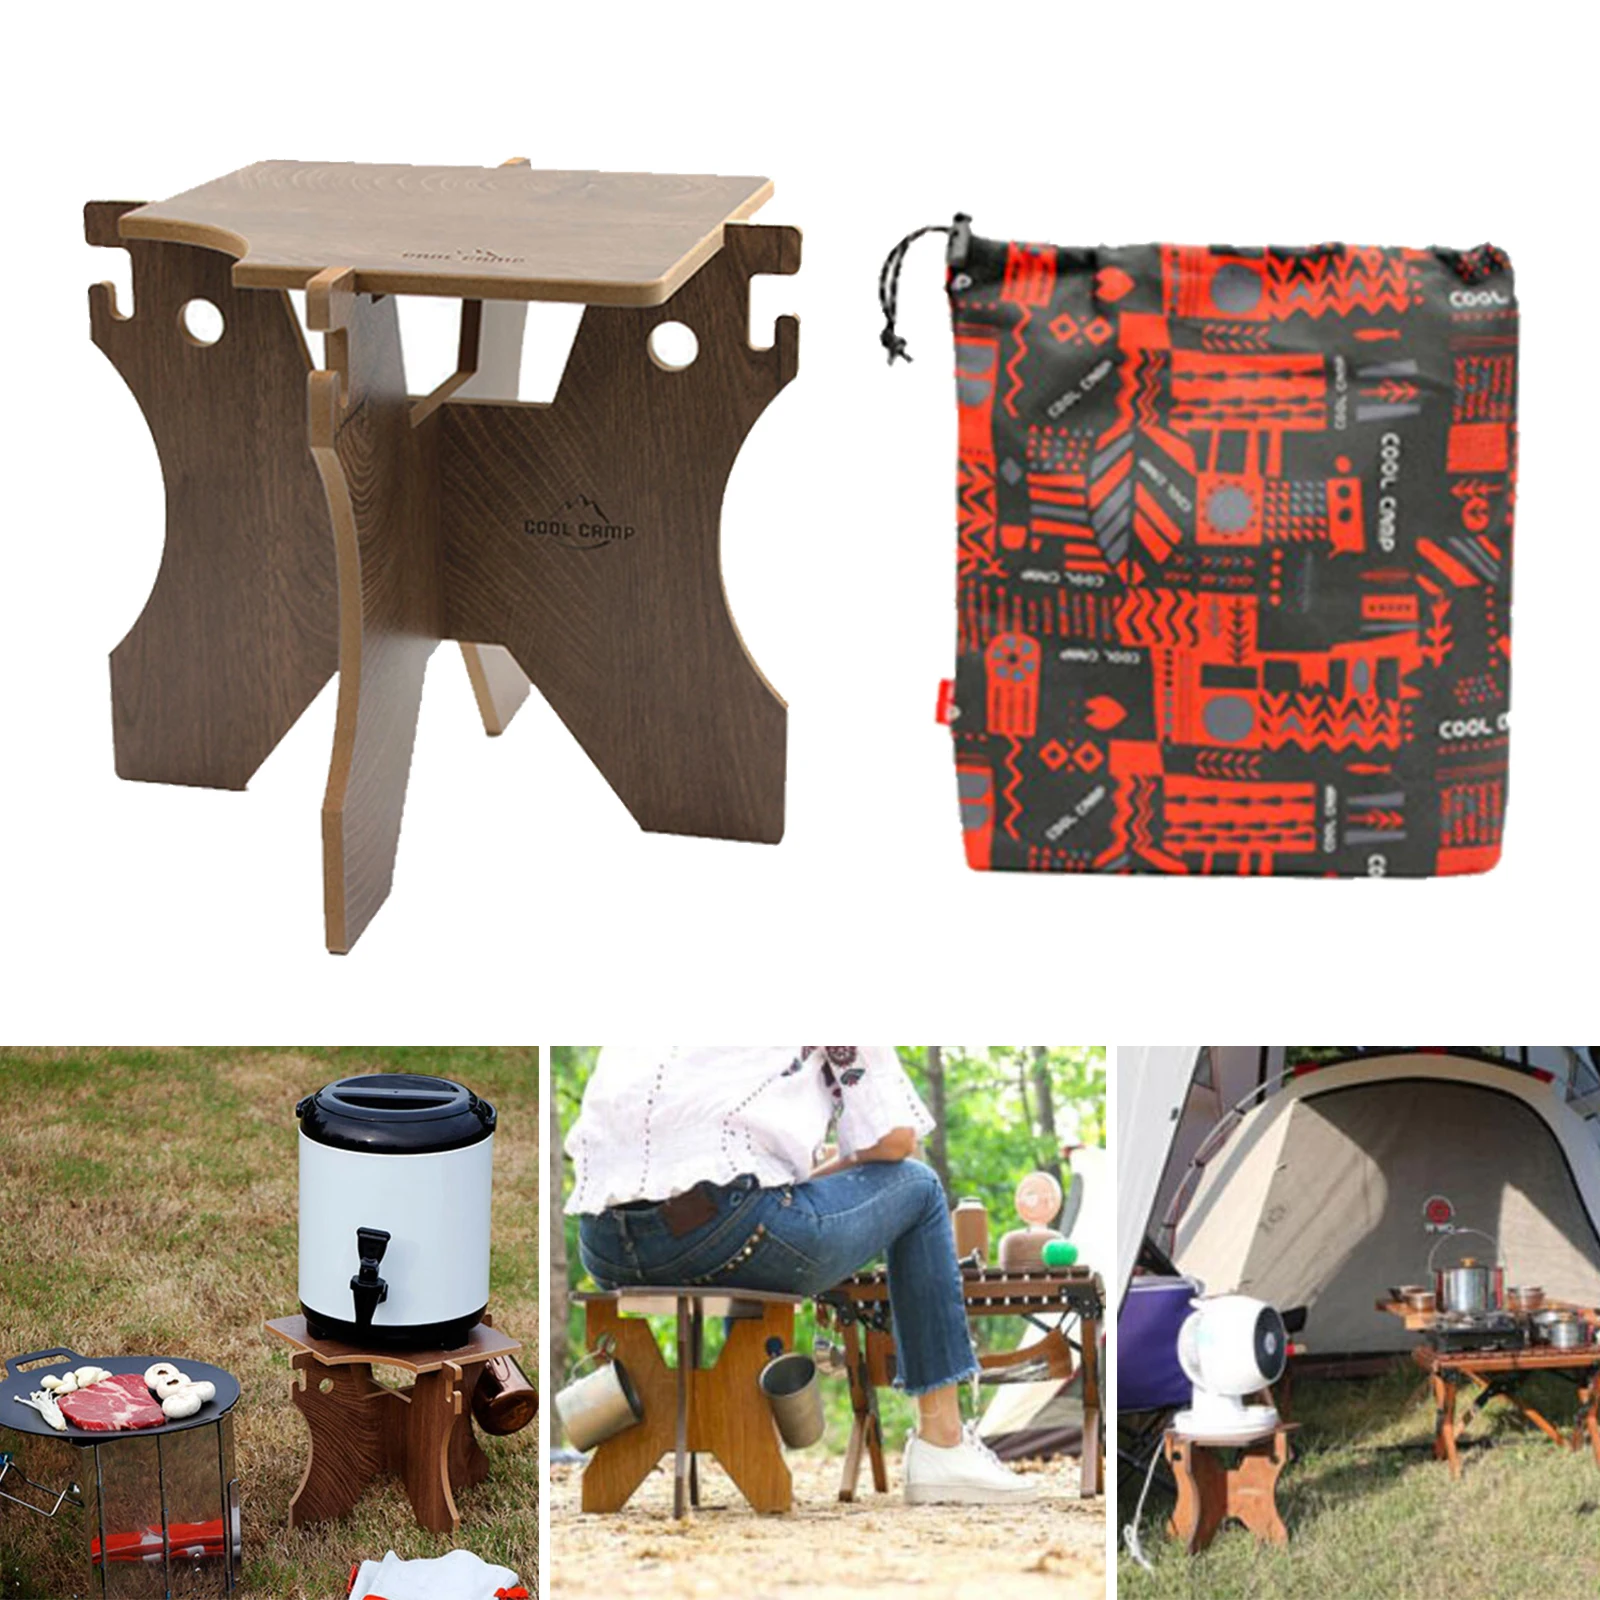 Foldable Camping Water Bucket Stand Wooden Beer Pail Holder Support Rack Frame Shelf Cup Hanger Hooks Folding Stool Chair